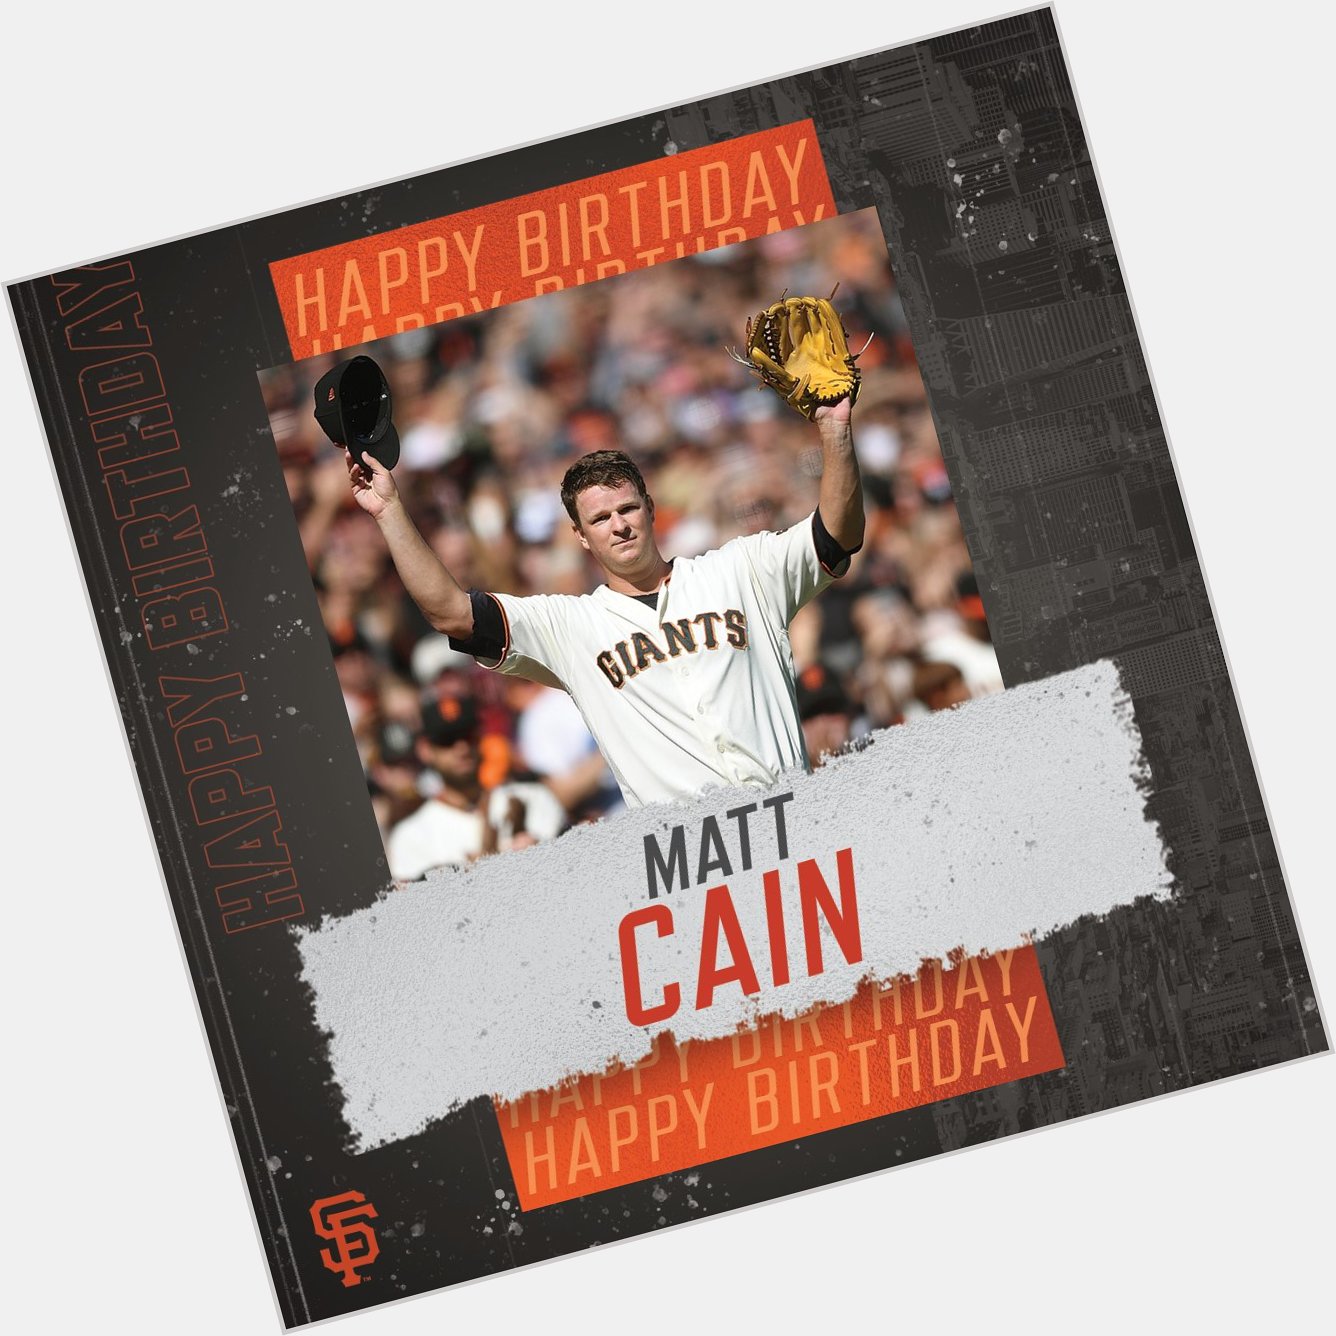 \"A big-time happy birthday wish to the legend and Matt Cain 